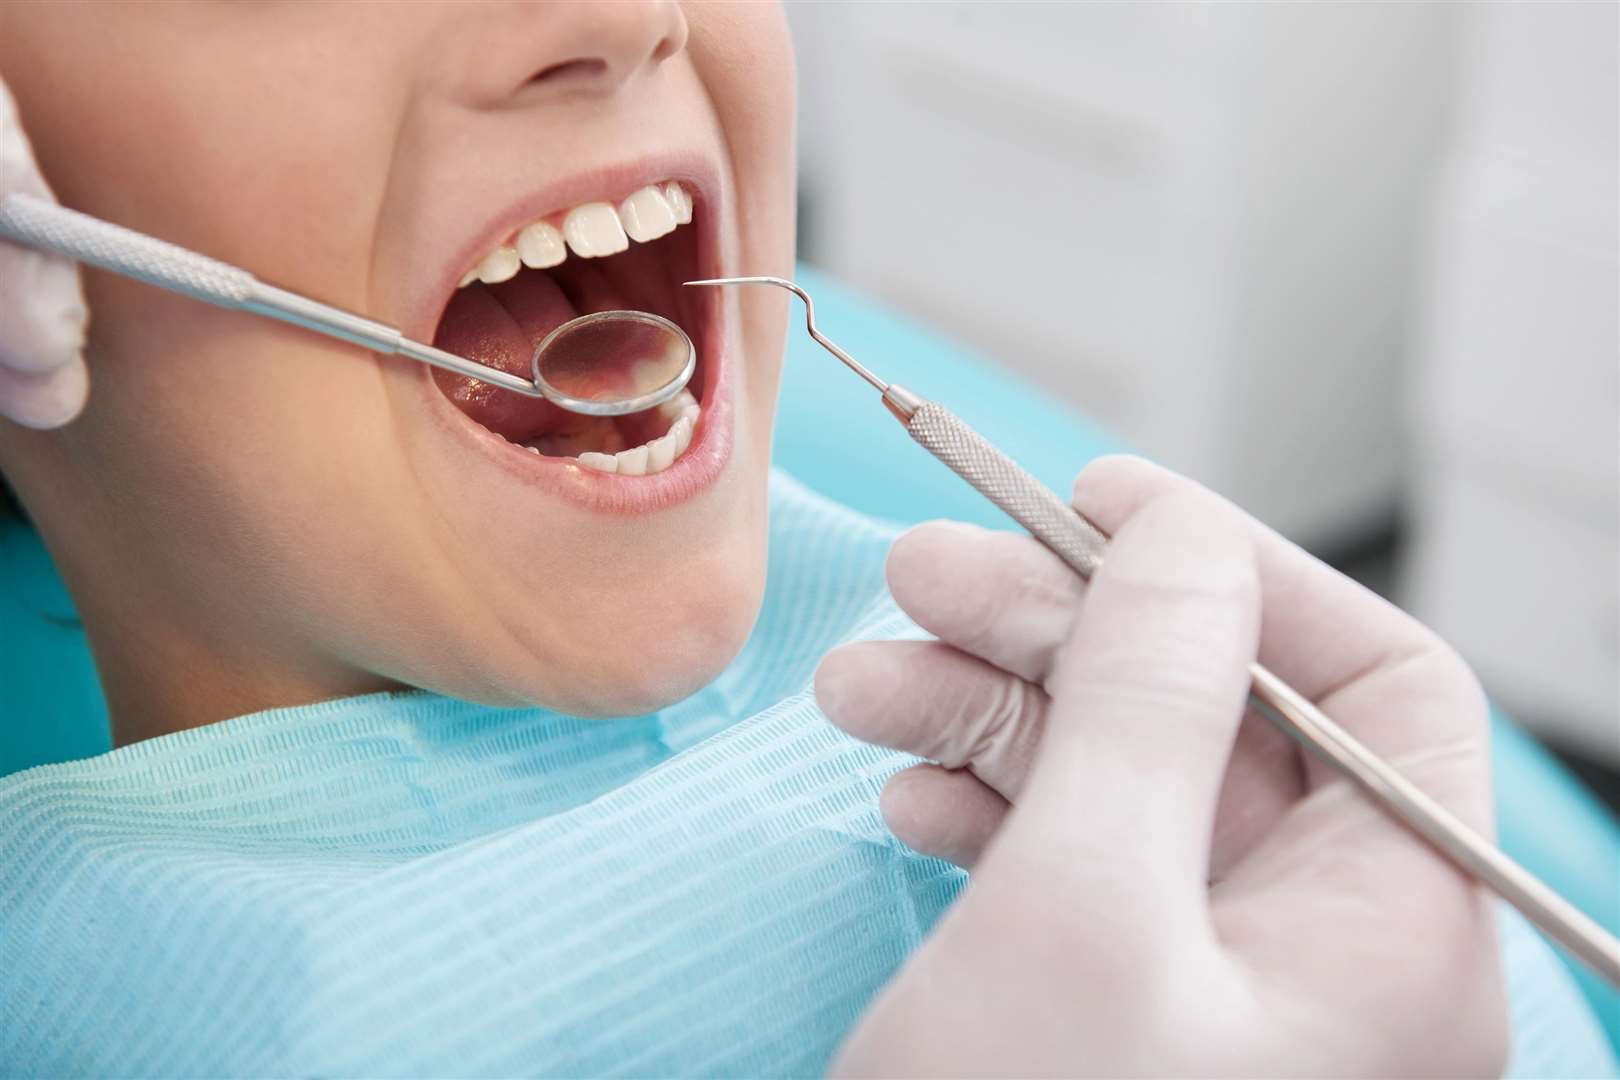 Health bosses are taking emergency action to tackle a dental crisis in children. Picture:iStock